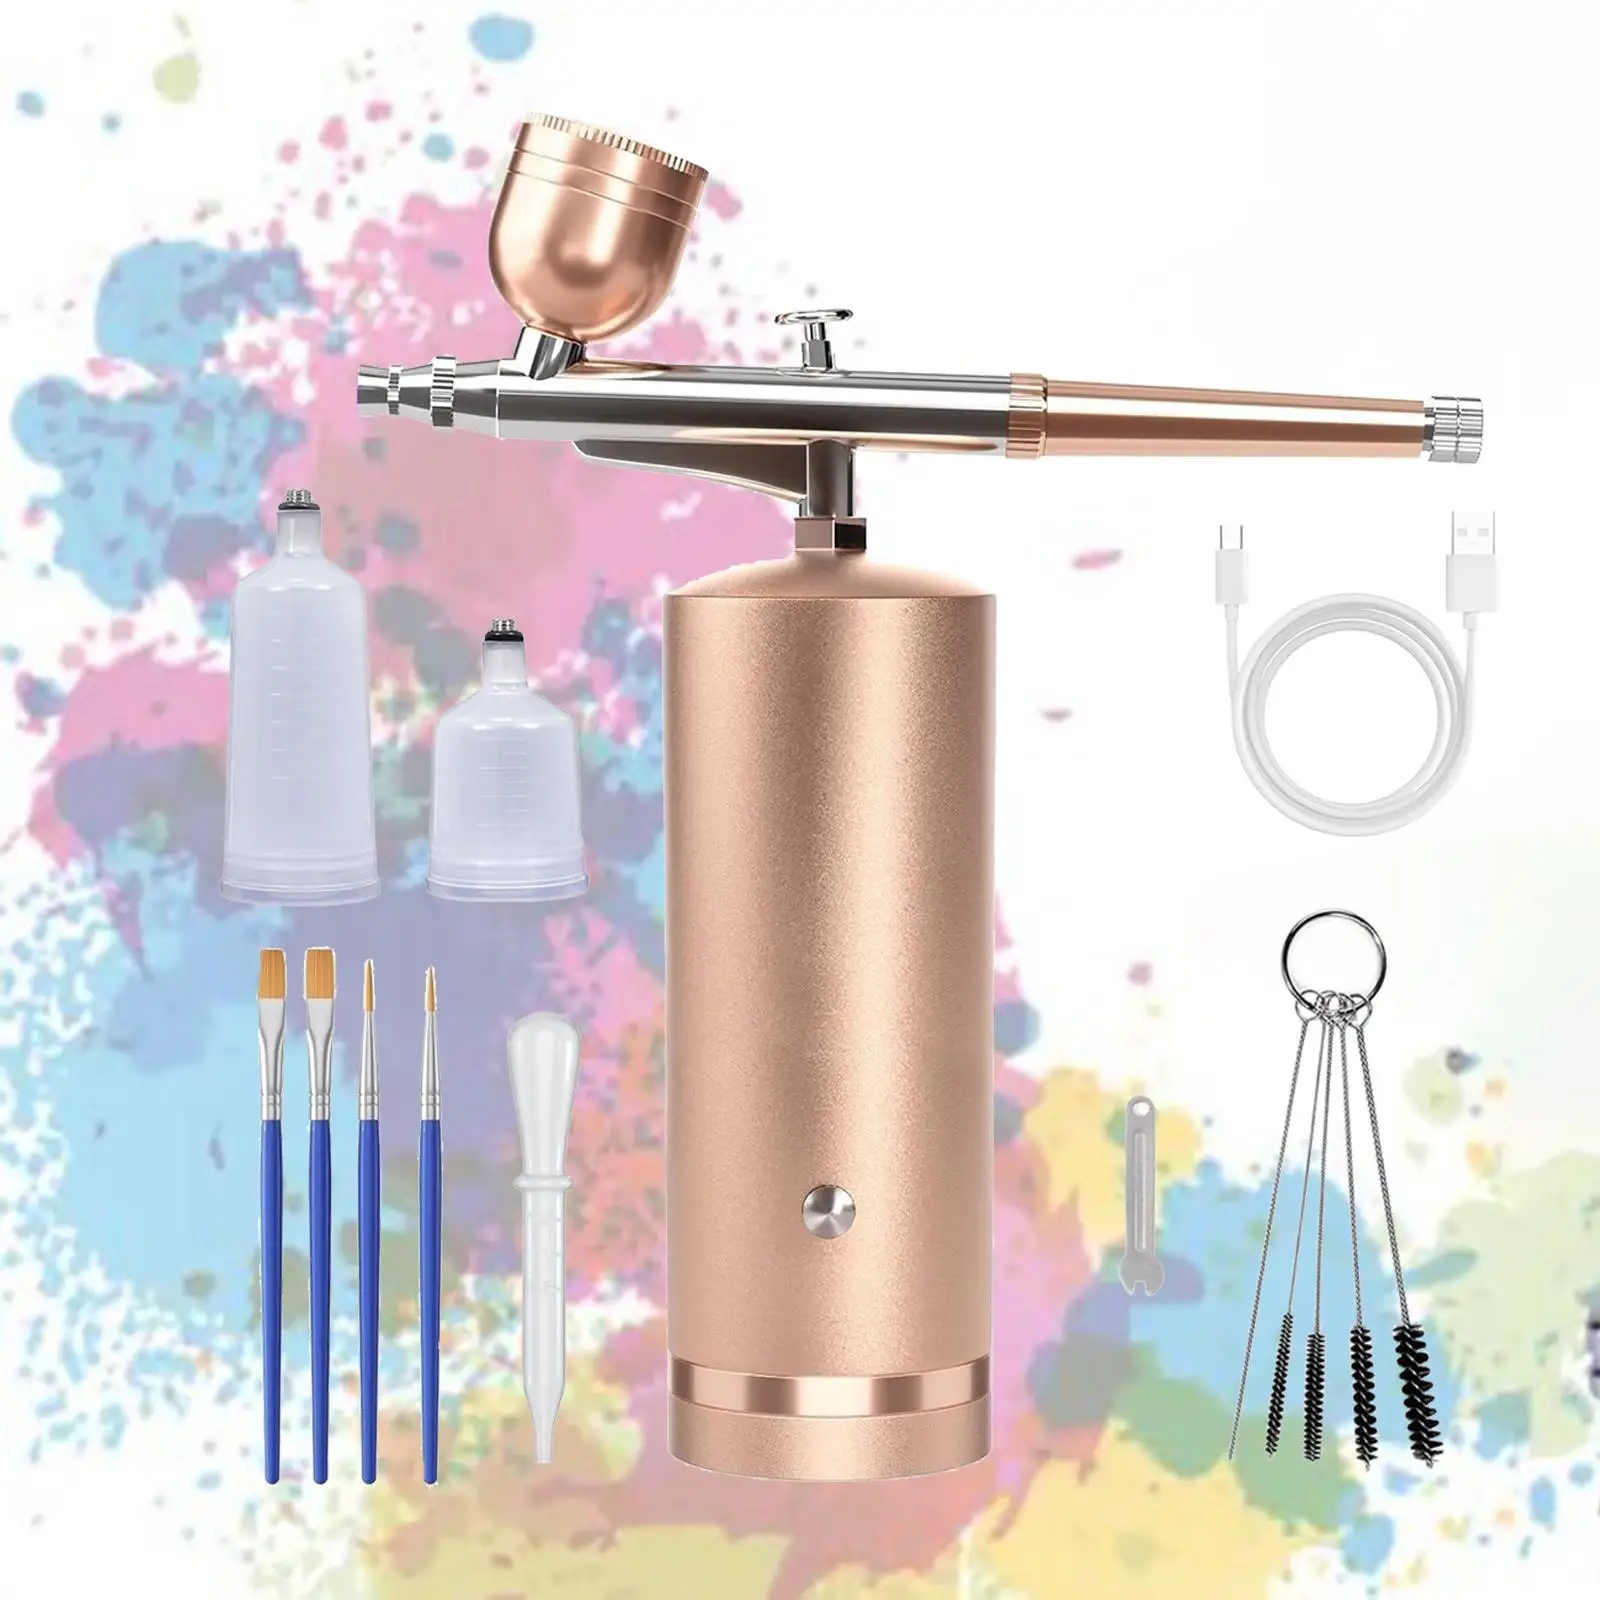 Airbrush Set 48 PSI and Cleaning Brush Set Cake Airbrush Decorating for Cakes Decor Model Coloring Clothes Coloring Makeup Craft